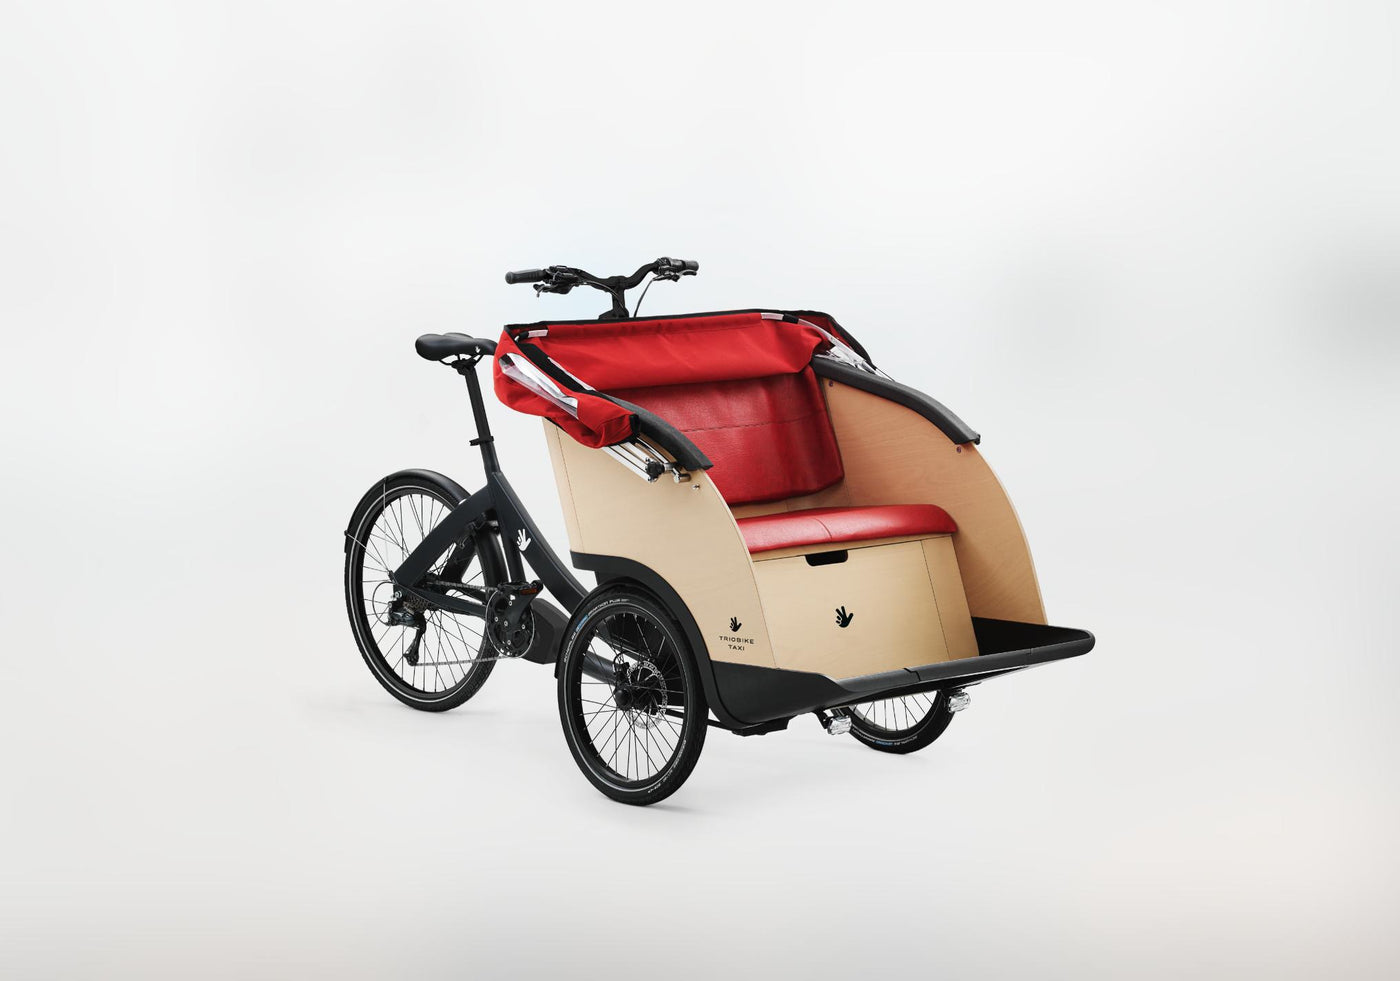 Triobike Taxi Bosch CL Enviolo Belt Drive  "Cycling Without Age" - Pre Order Today!